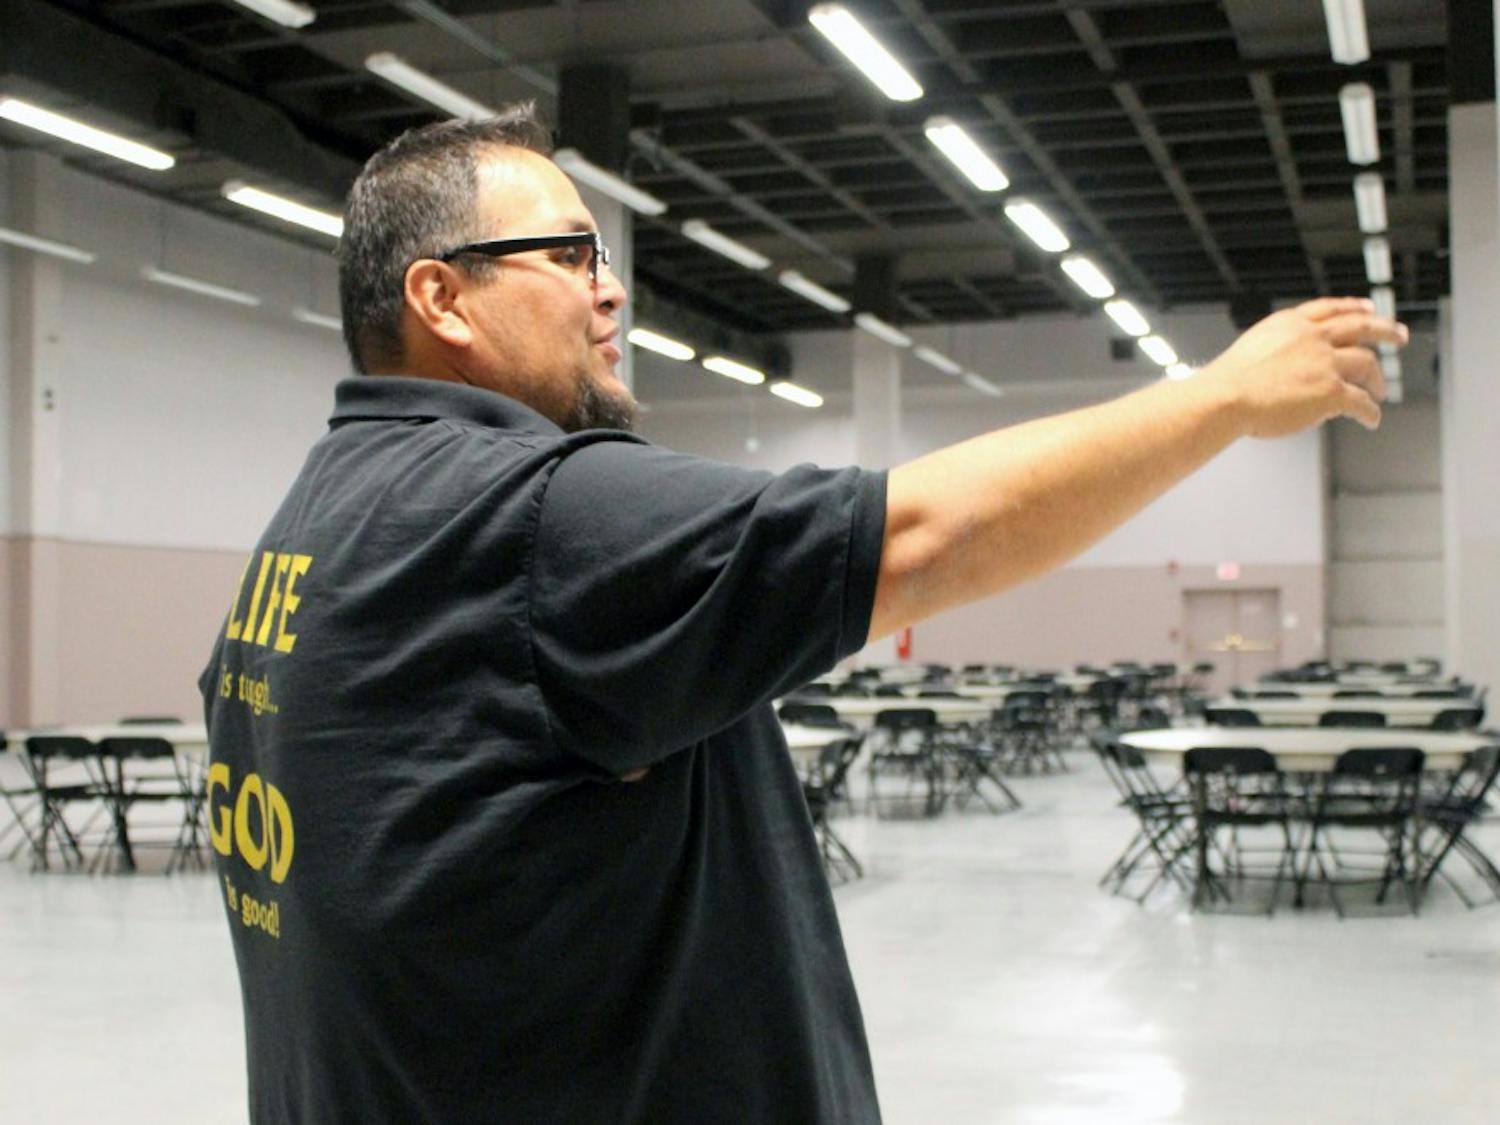 Dennis Billy, residence service manager at Joy Junction, discusses the setup for Thursday’s Thanksgiving meal on Tuesday afternoon. Joy Junction will serve 1,500 families at the convention center.